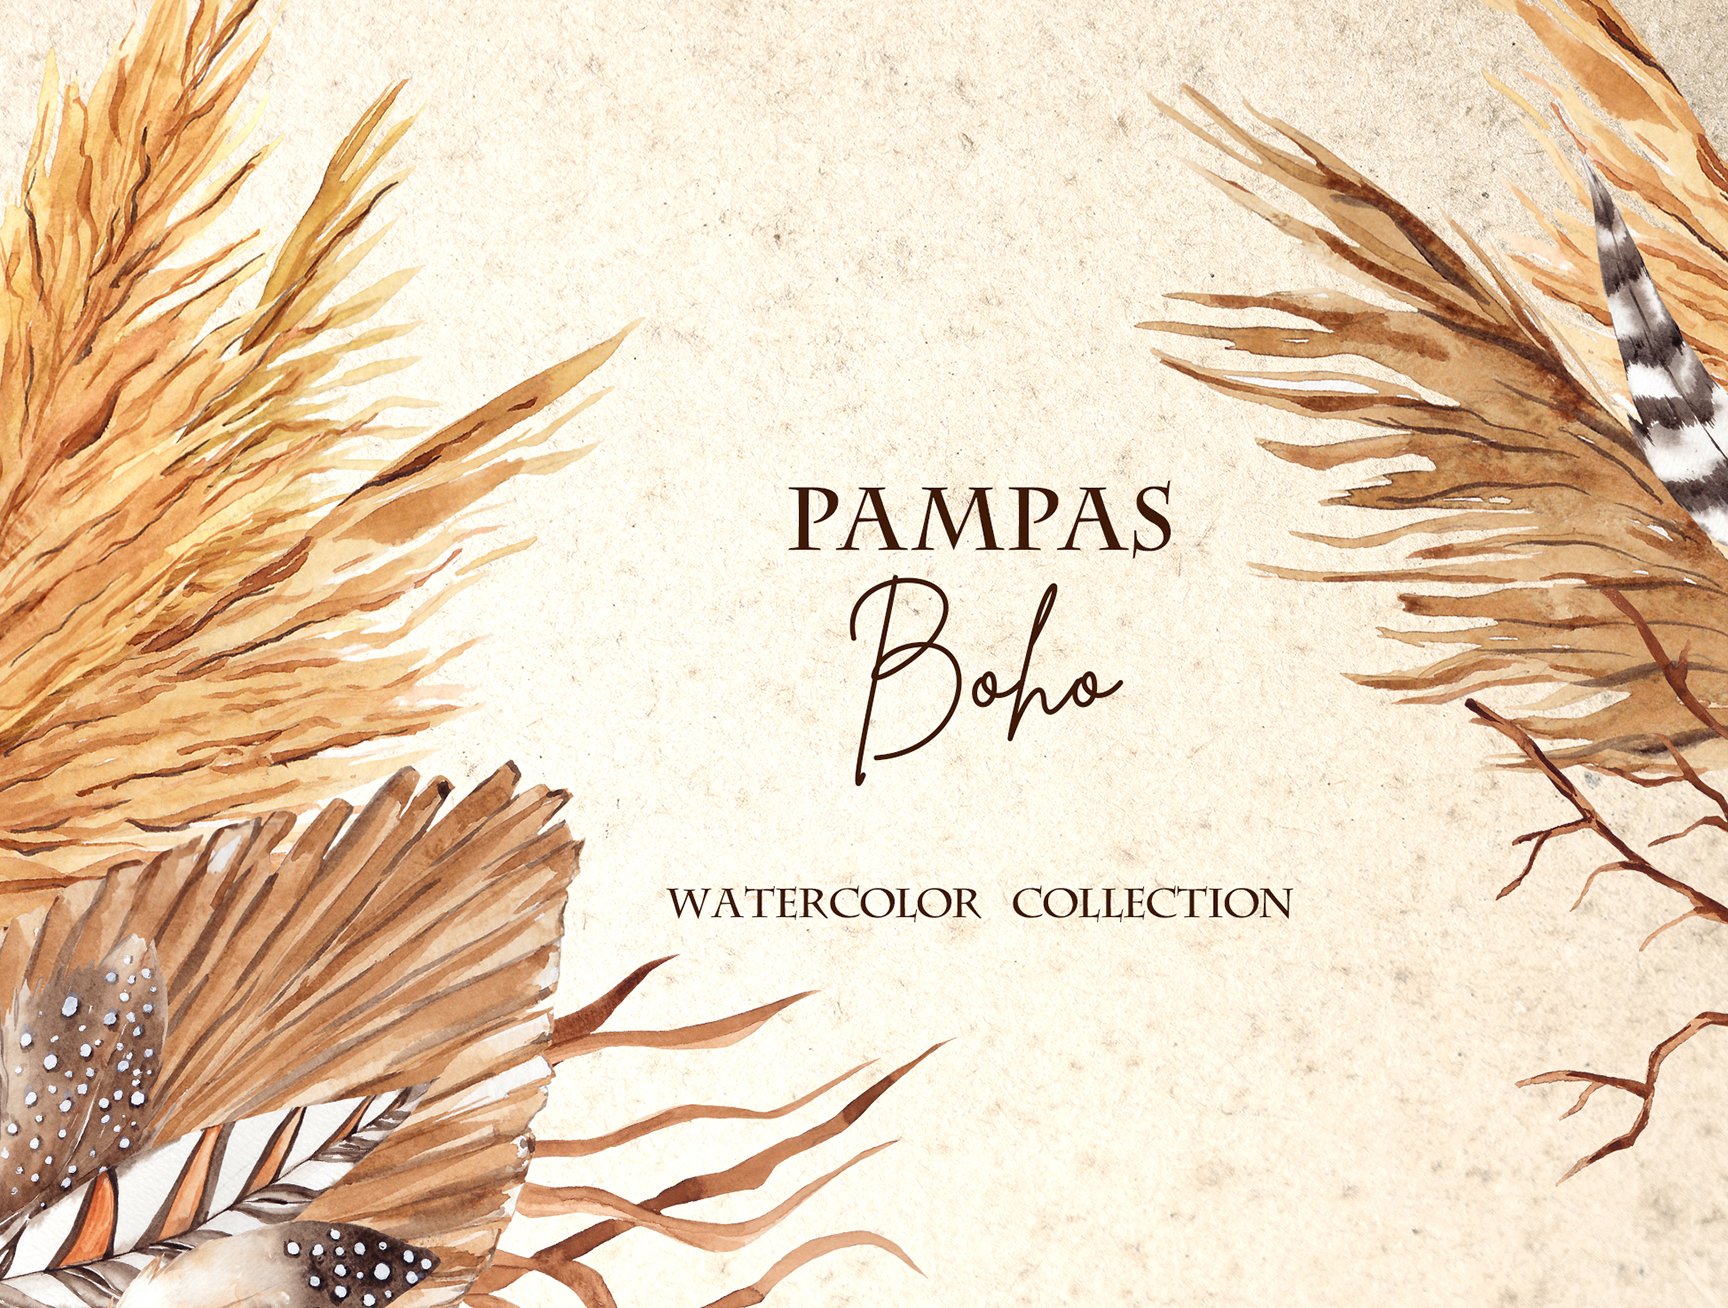 Pampas Boho. Watercolor collection cover image.